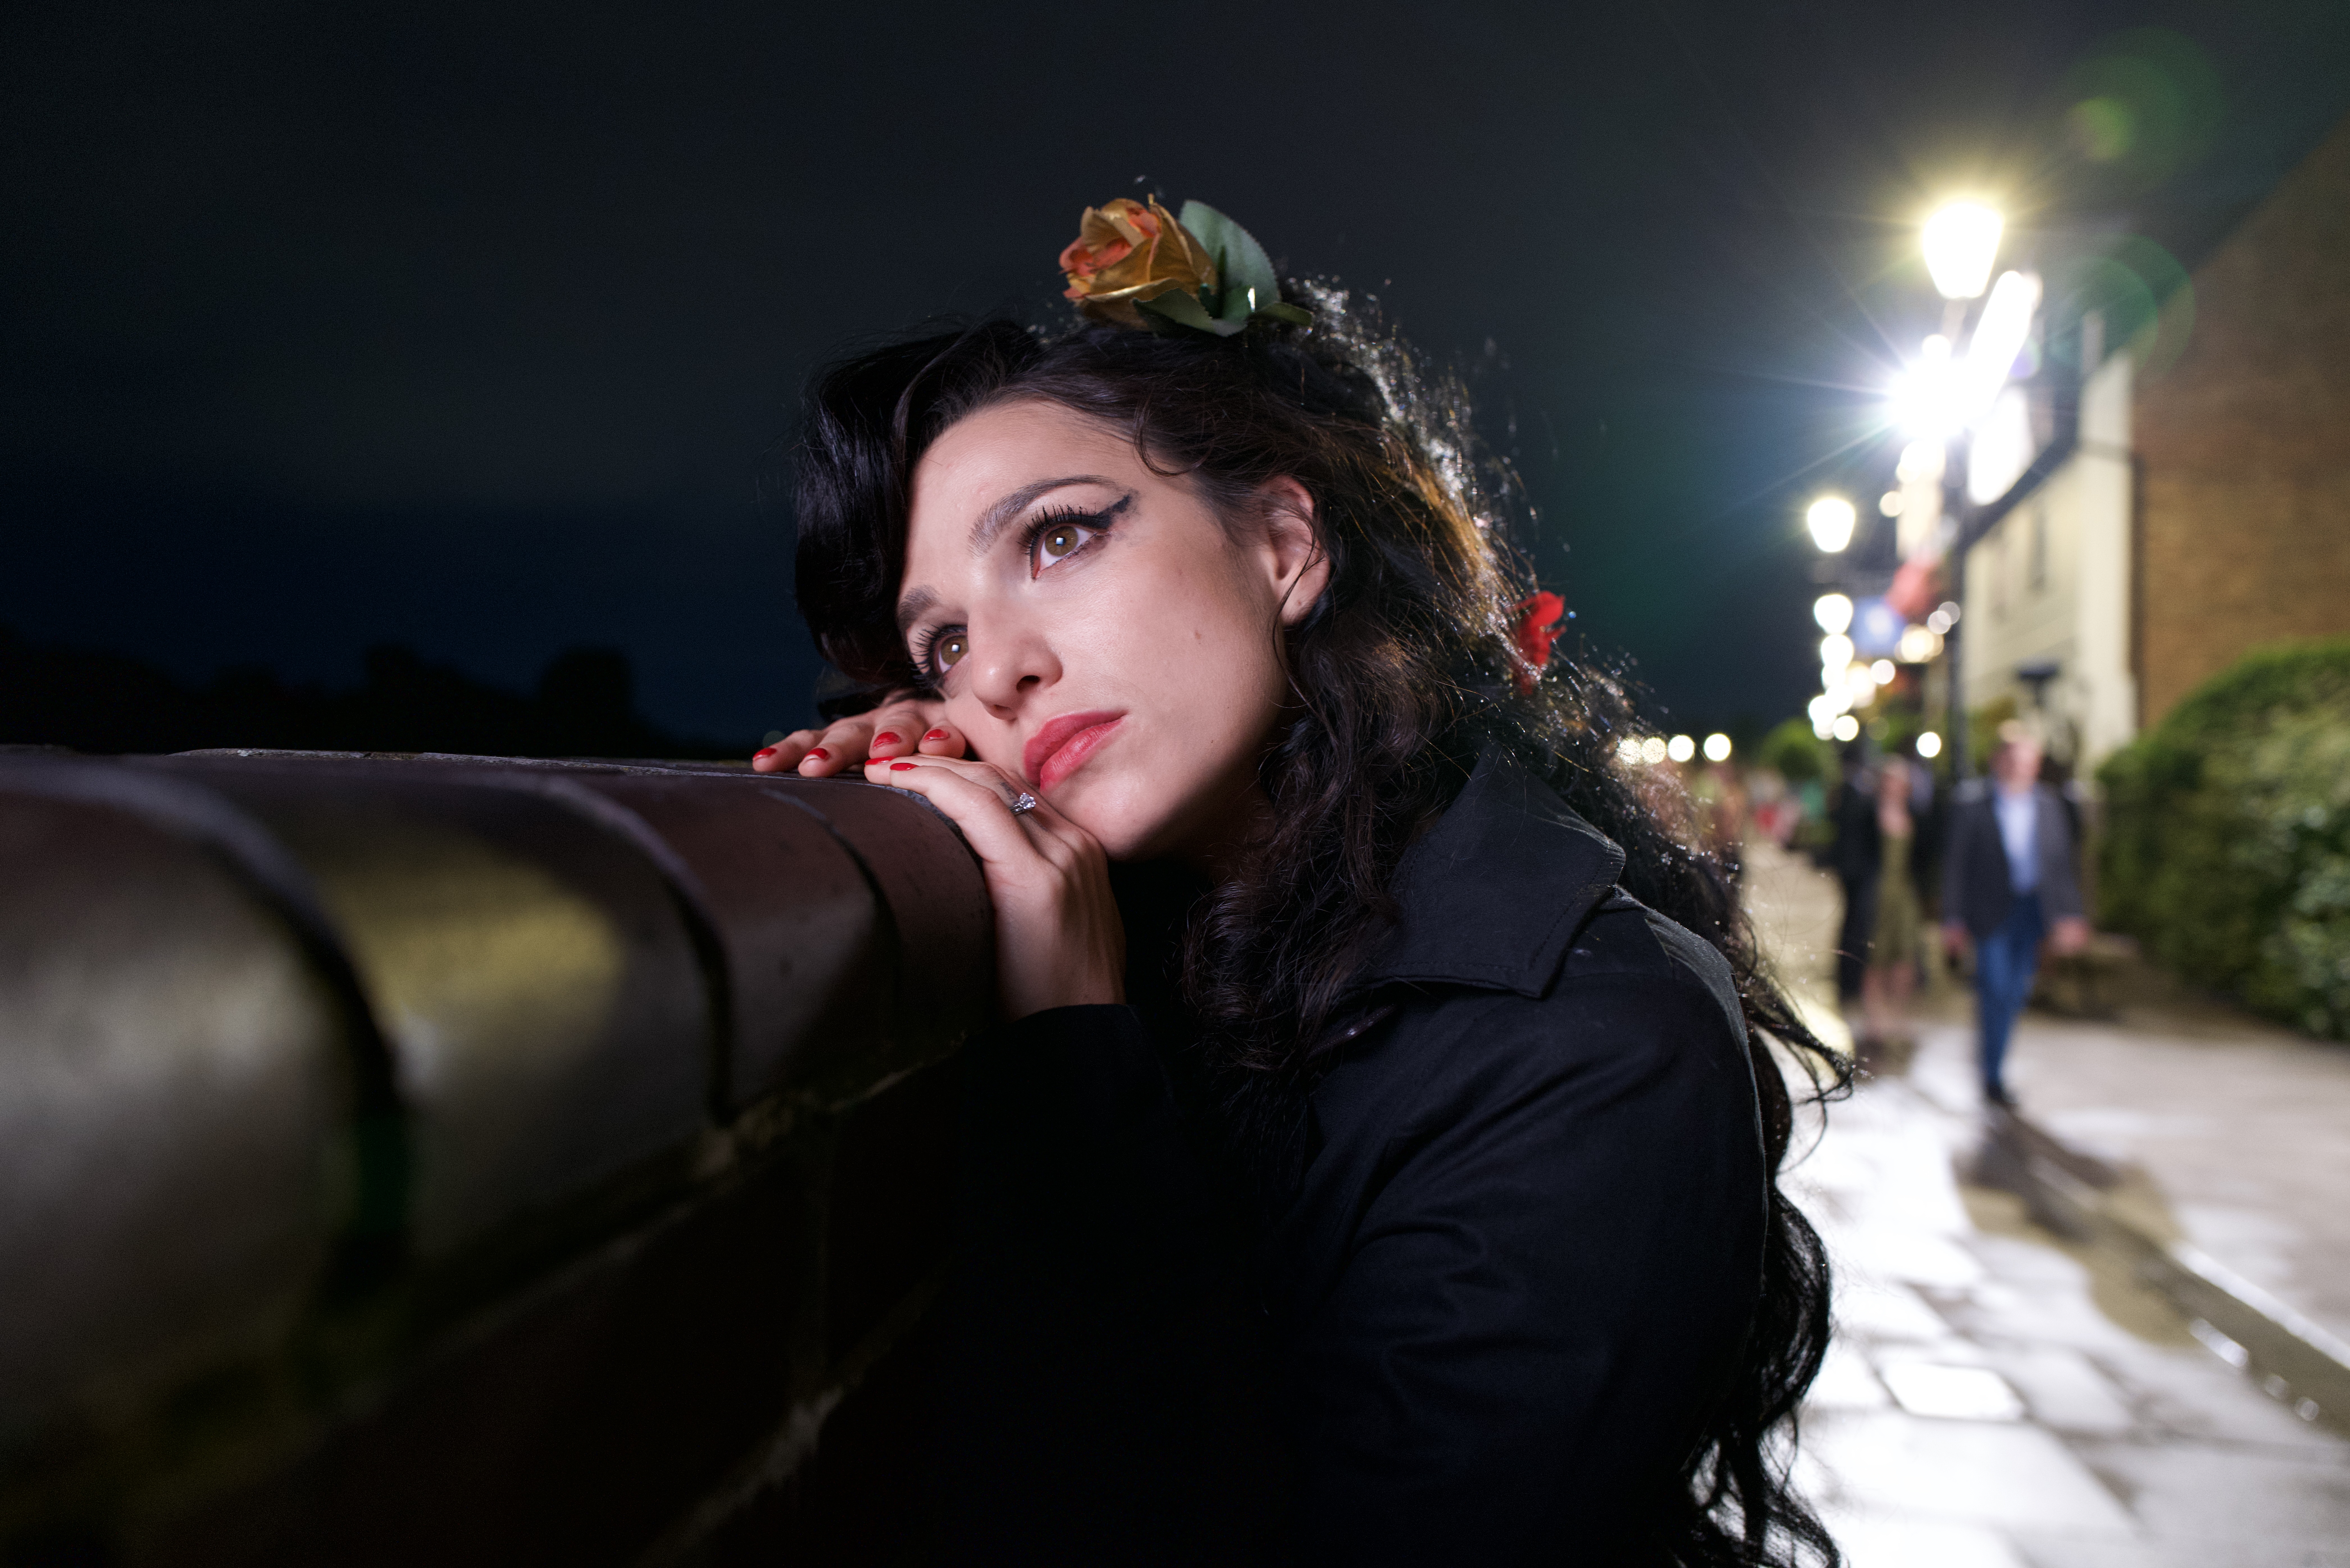 Marisa Abela as Amy Winehouse in 'Back To Black' on Lower Mall in Hammersmith